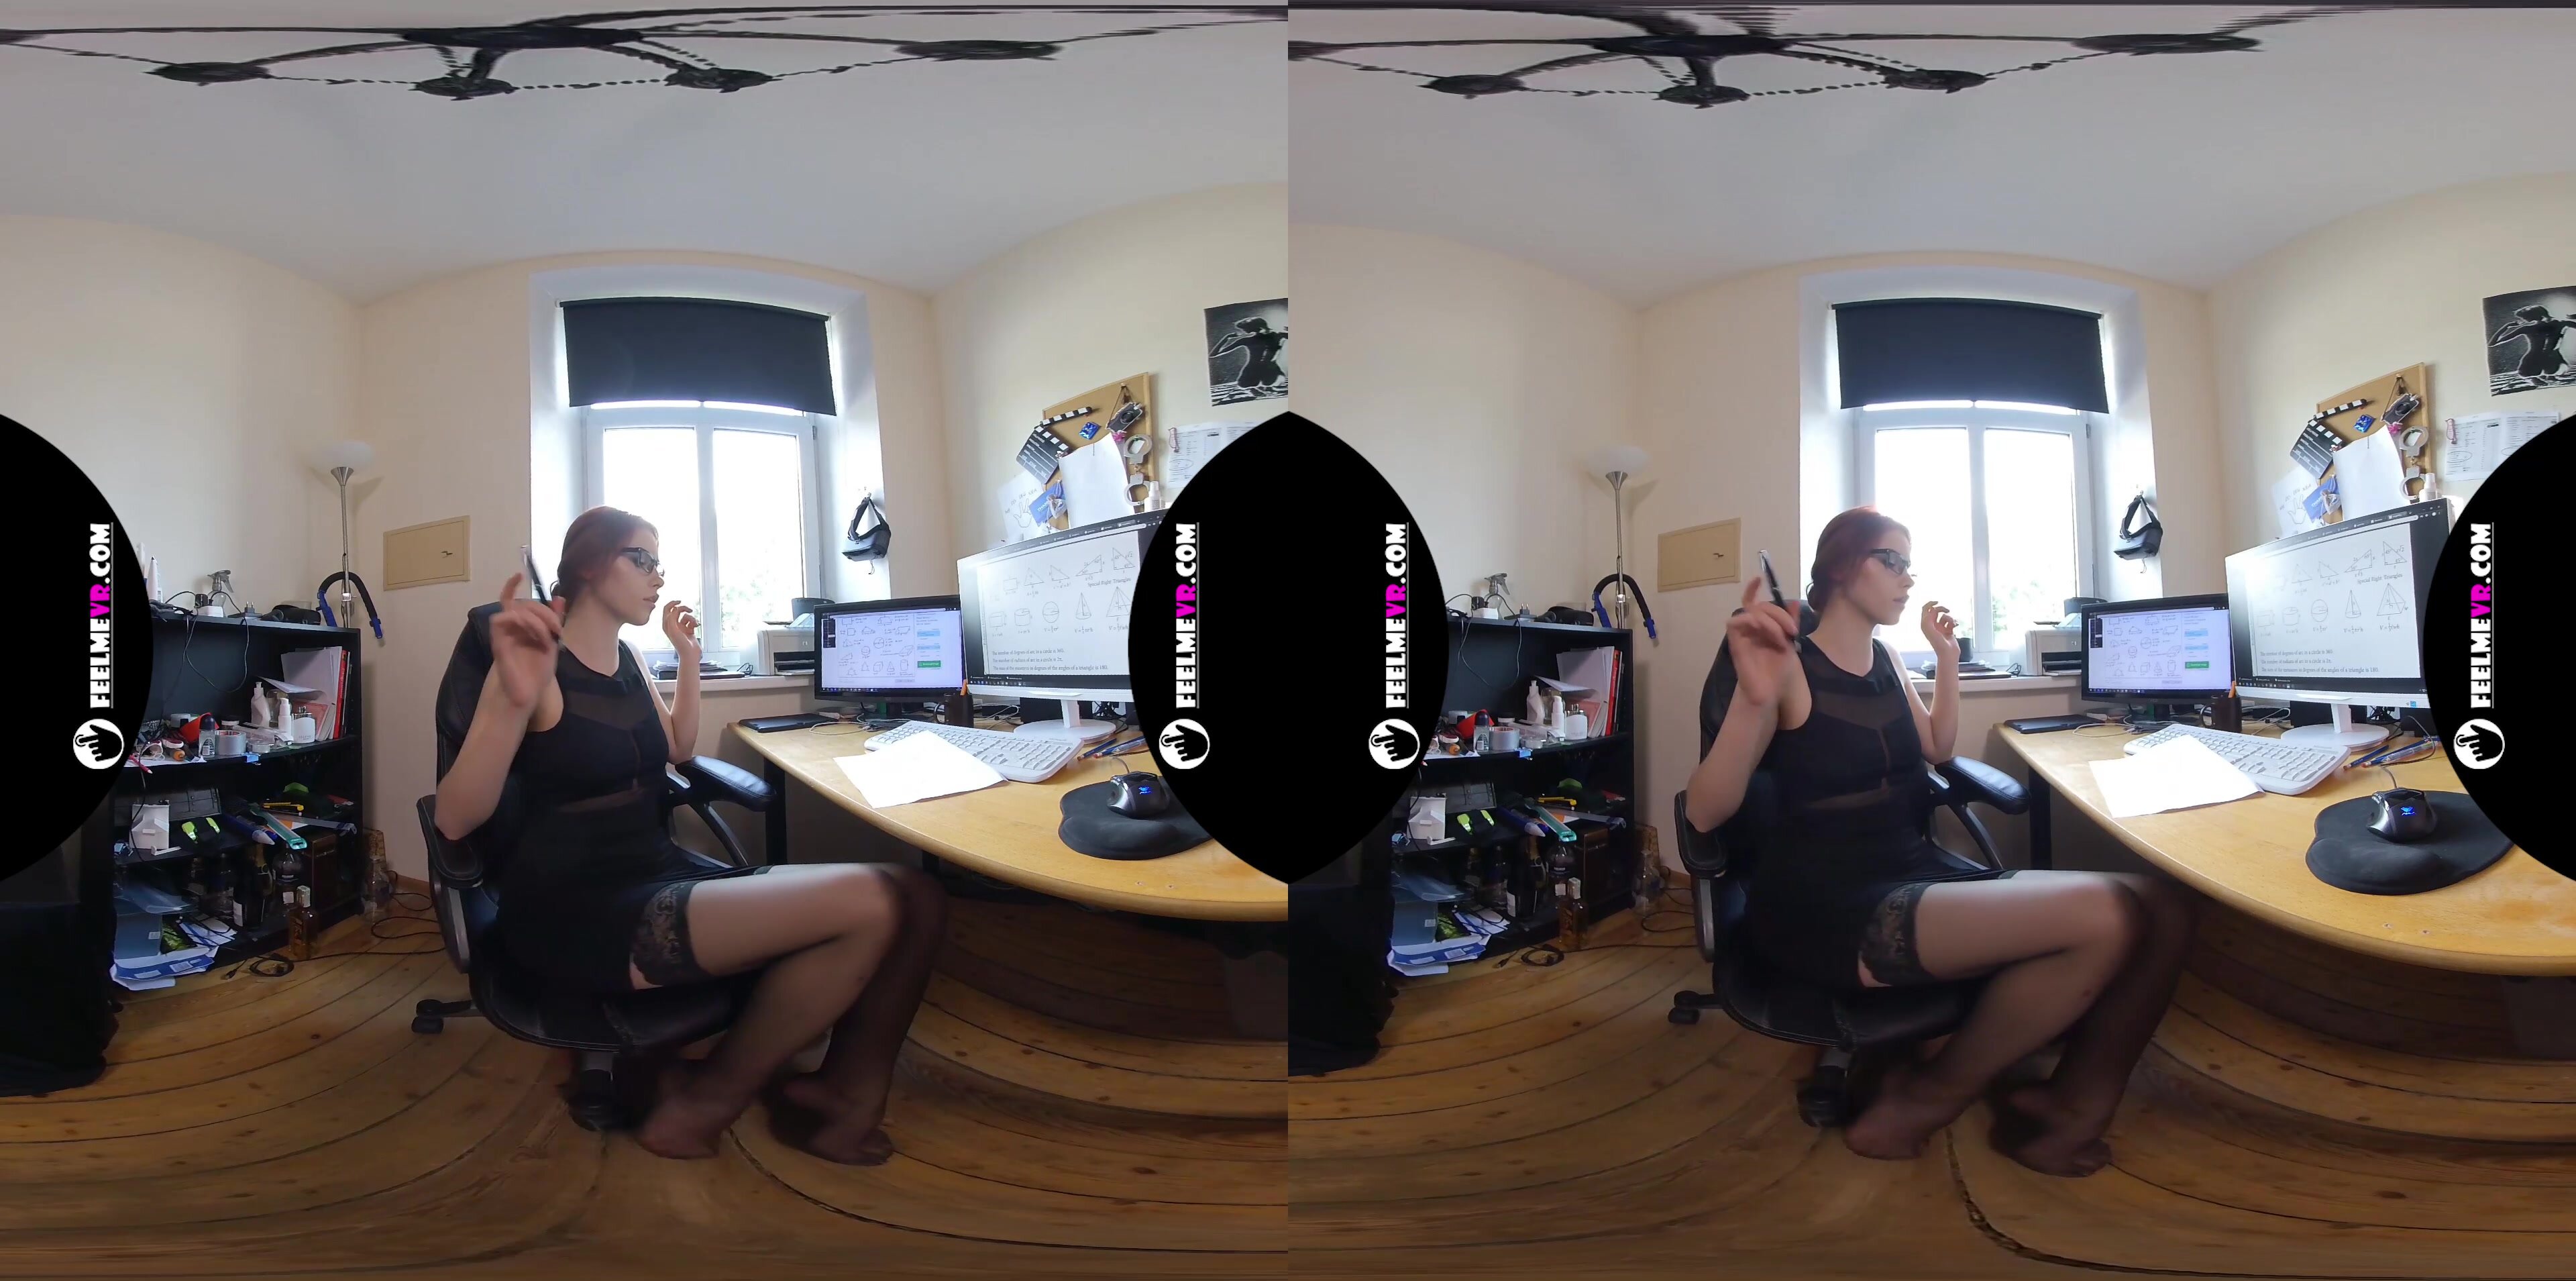 Margarita young teen virtual 3D strip in my office